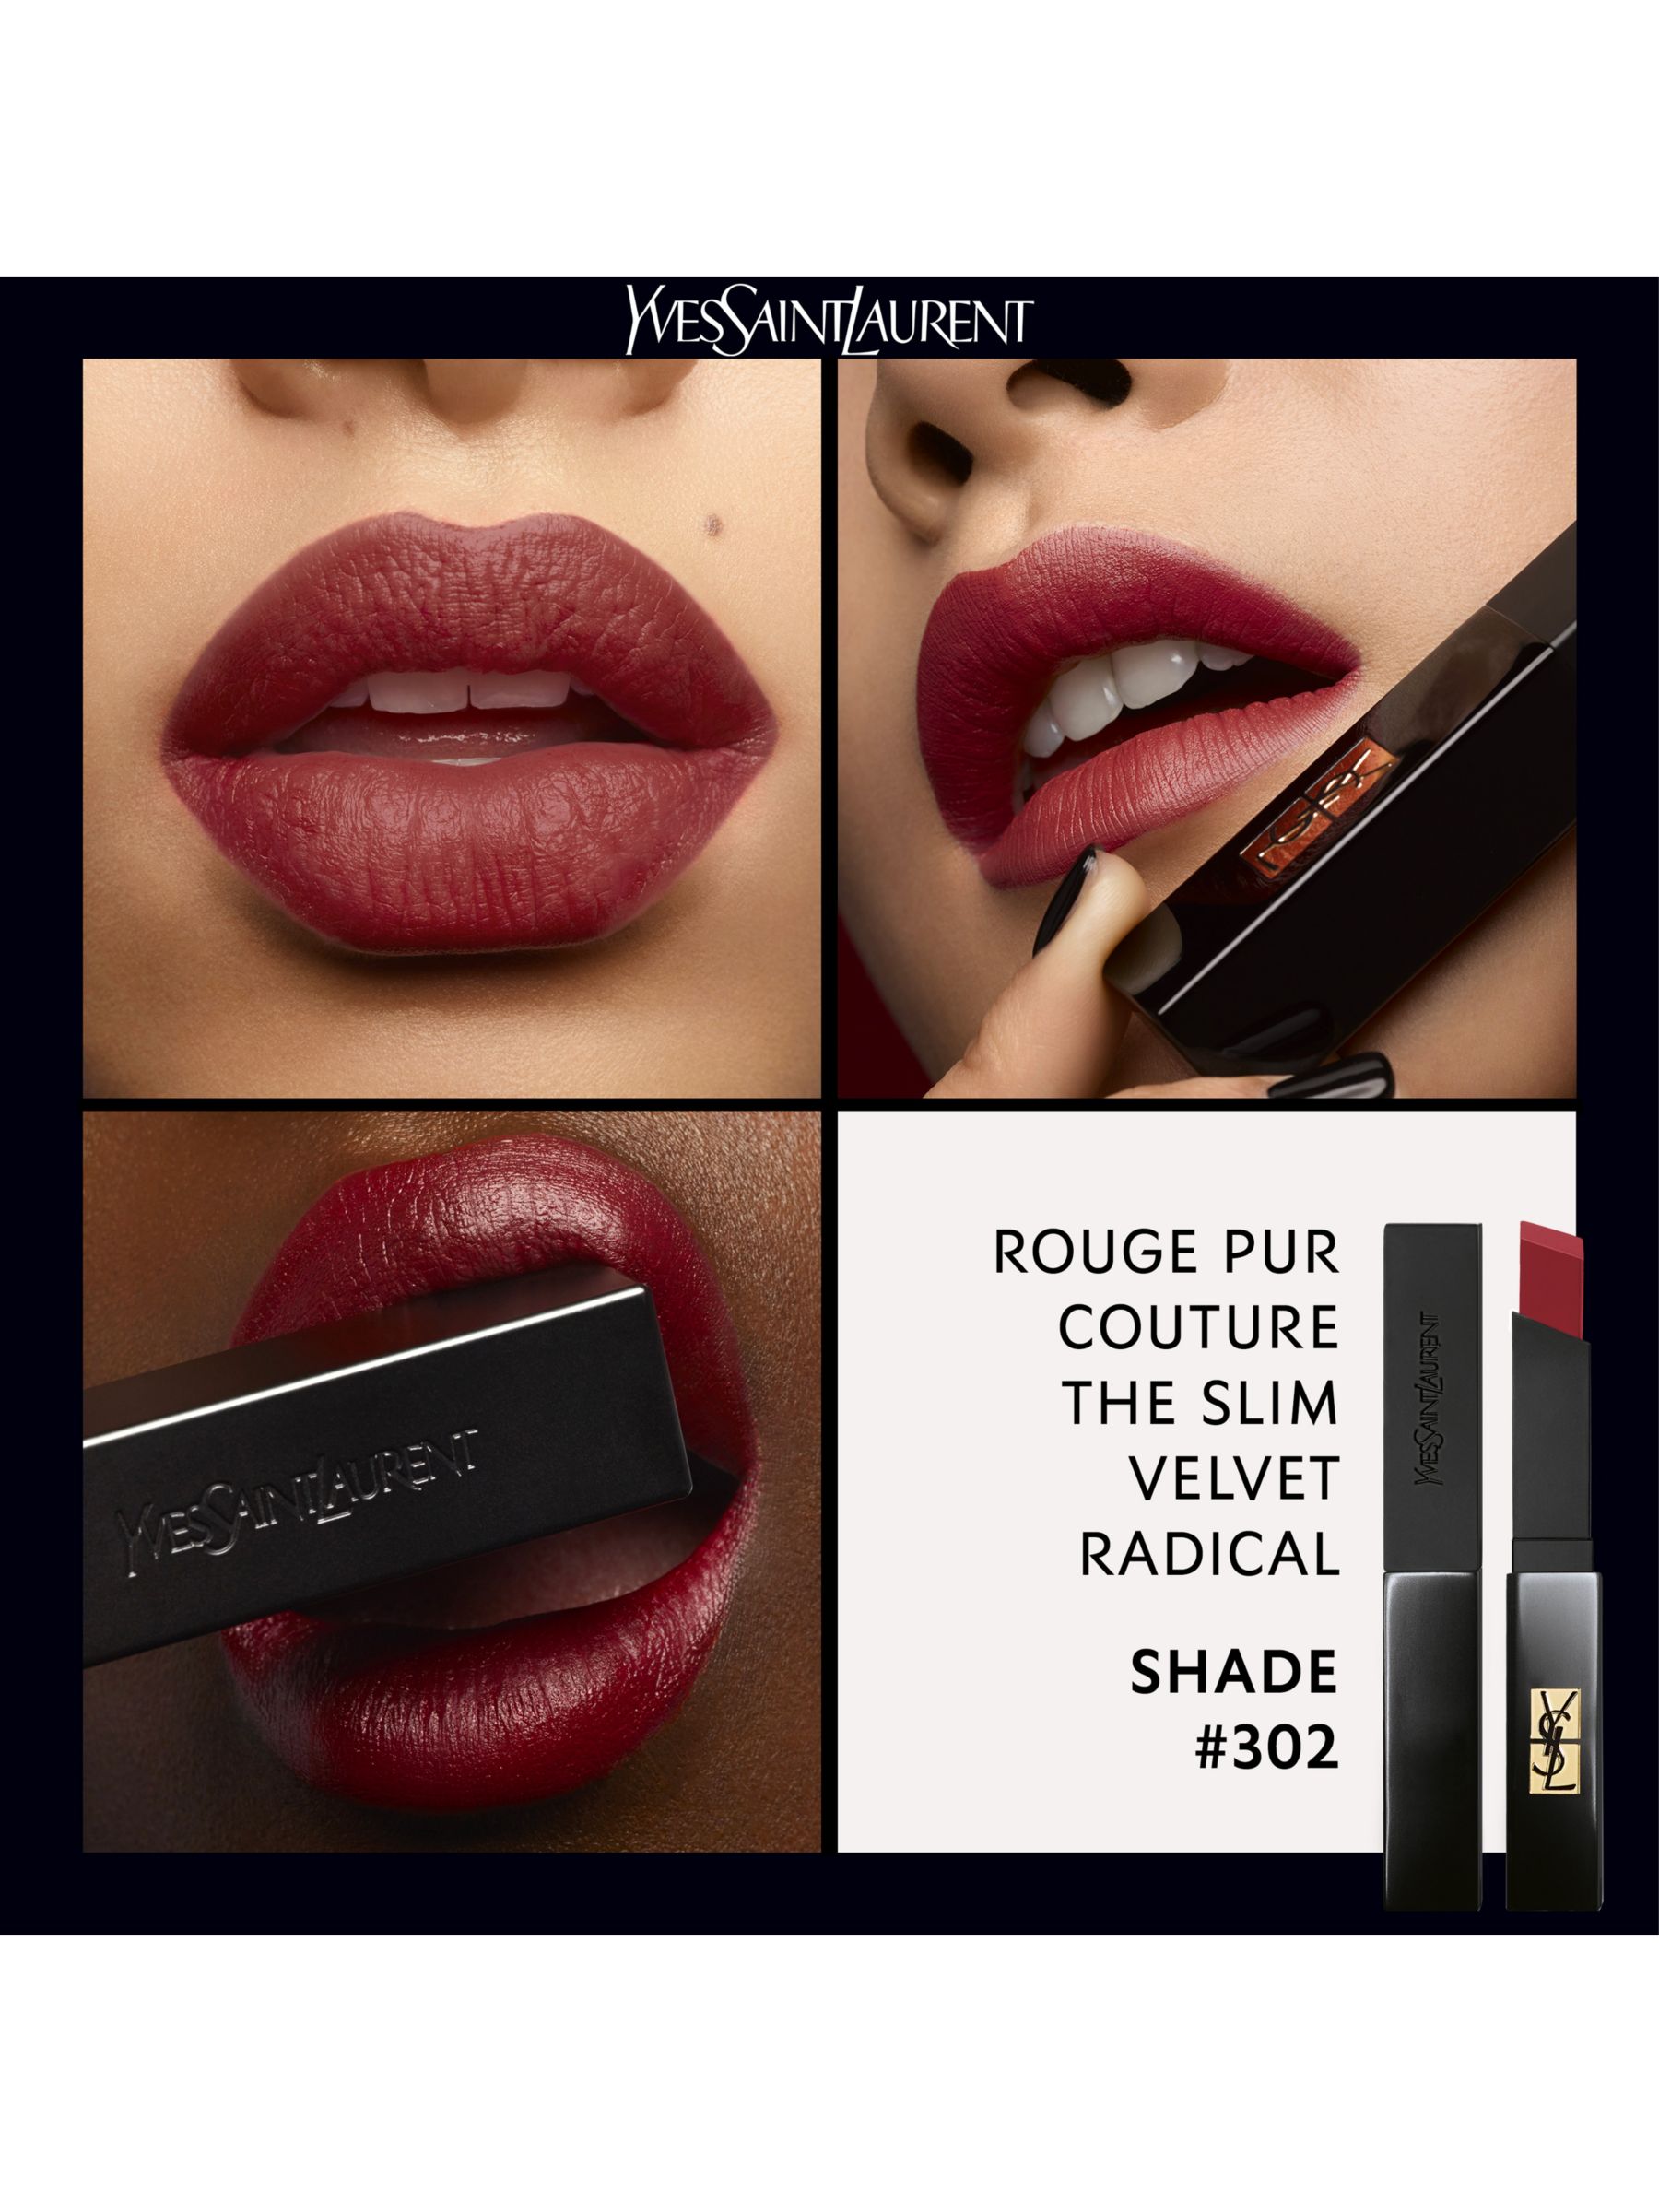 Yves Saint Laurent Rouge Pur Couture The Slim Velvet Radical Lipstick, 302 Nude Protest 6